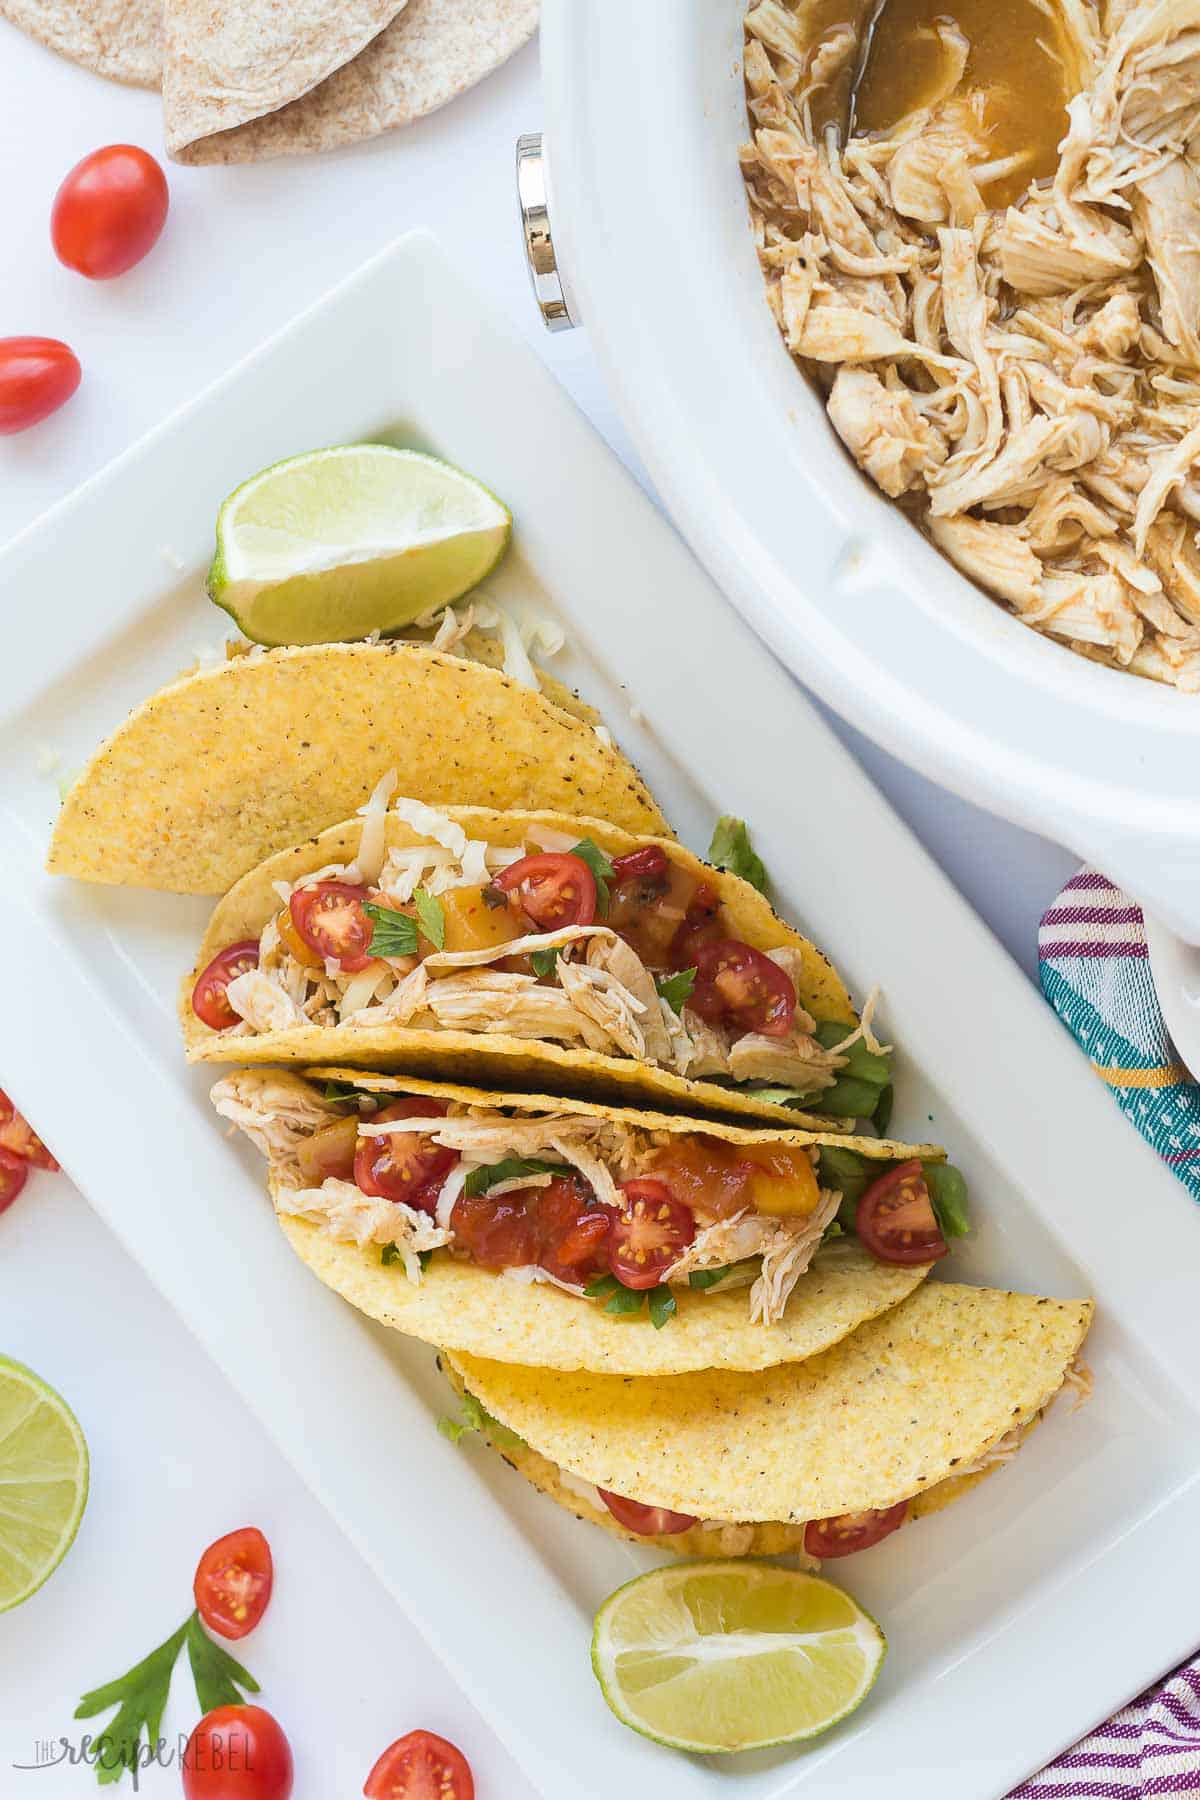 These Sweet & Spicy Slow Cooker Chicken Tacos are an easy, healthy, weeknight dinner! Just dump everything in the crockpot and forget about it. Step by step recipe video. | slow cooker recipes | crockpot recipe | crock pot recipe | chicken dinner | healthy recipe | low fat | low calorie | protein | game day | superbowl | #gameday #chickenrecipes #slowcookerrecipes